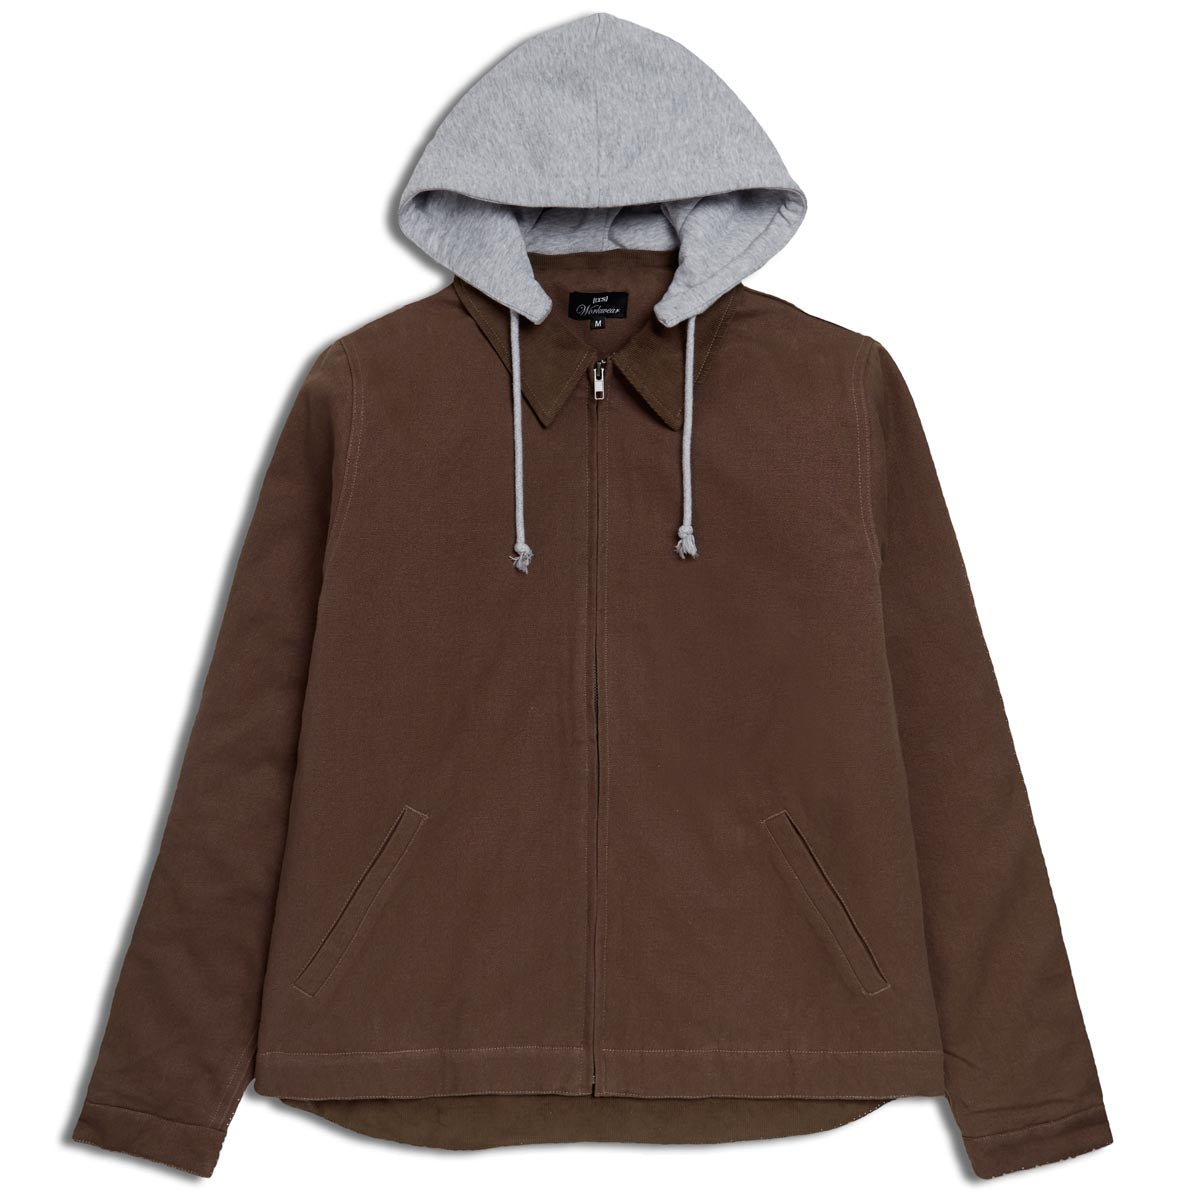 CCS Heavy Canvas Insulated Work Jacket - Brown image 1